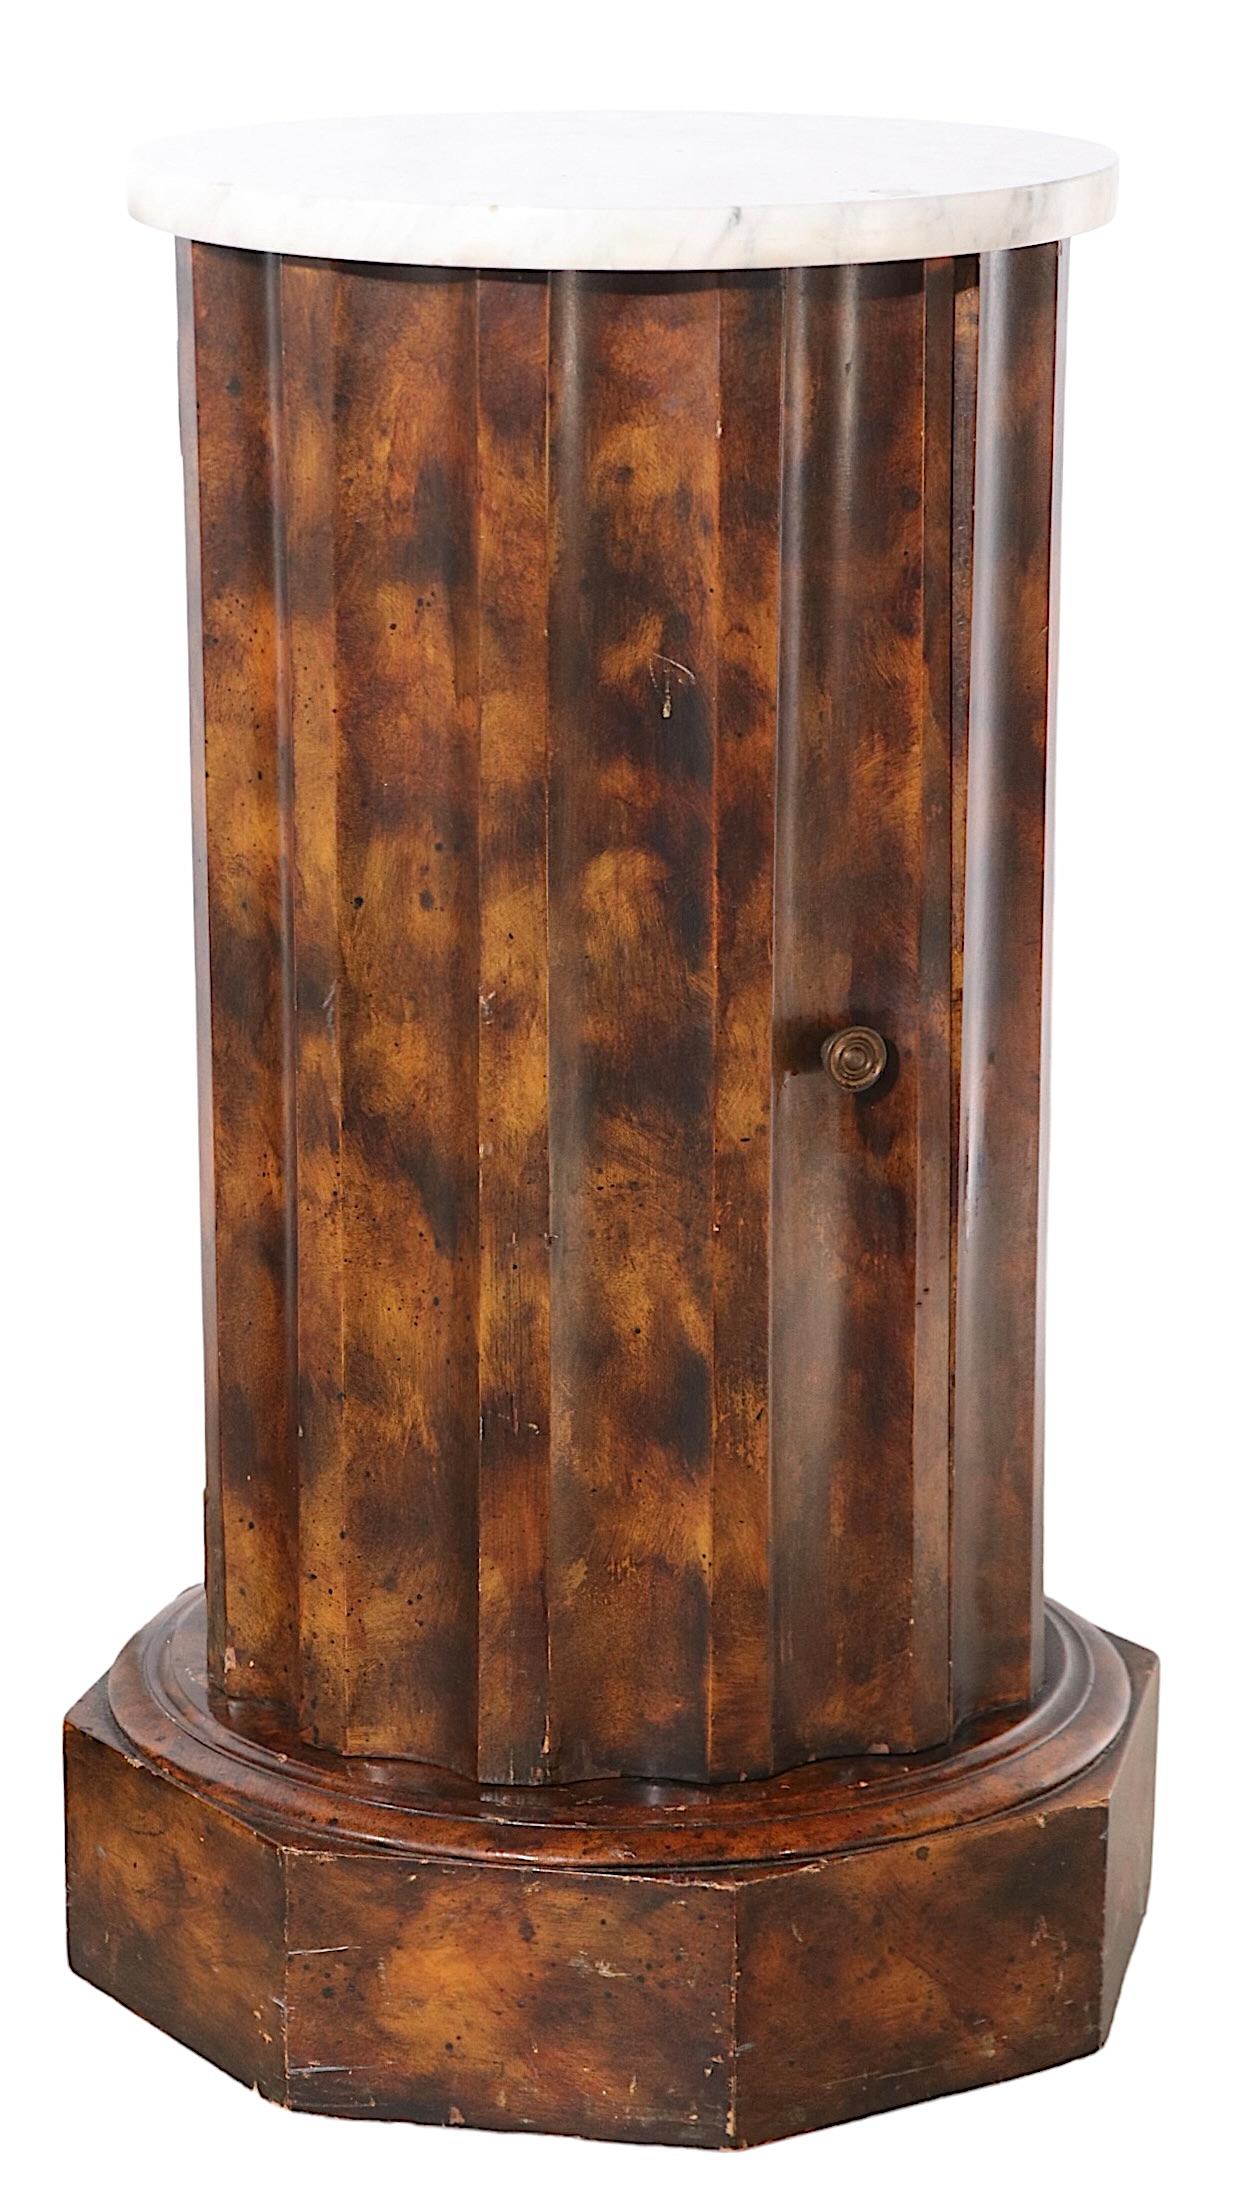 20th Century Pr. Decorative Marble Top Half Column Pedestals in Faux Tortoise Shell Finish For Sale